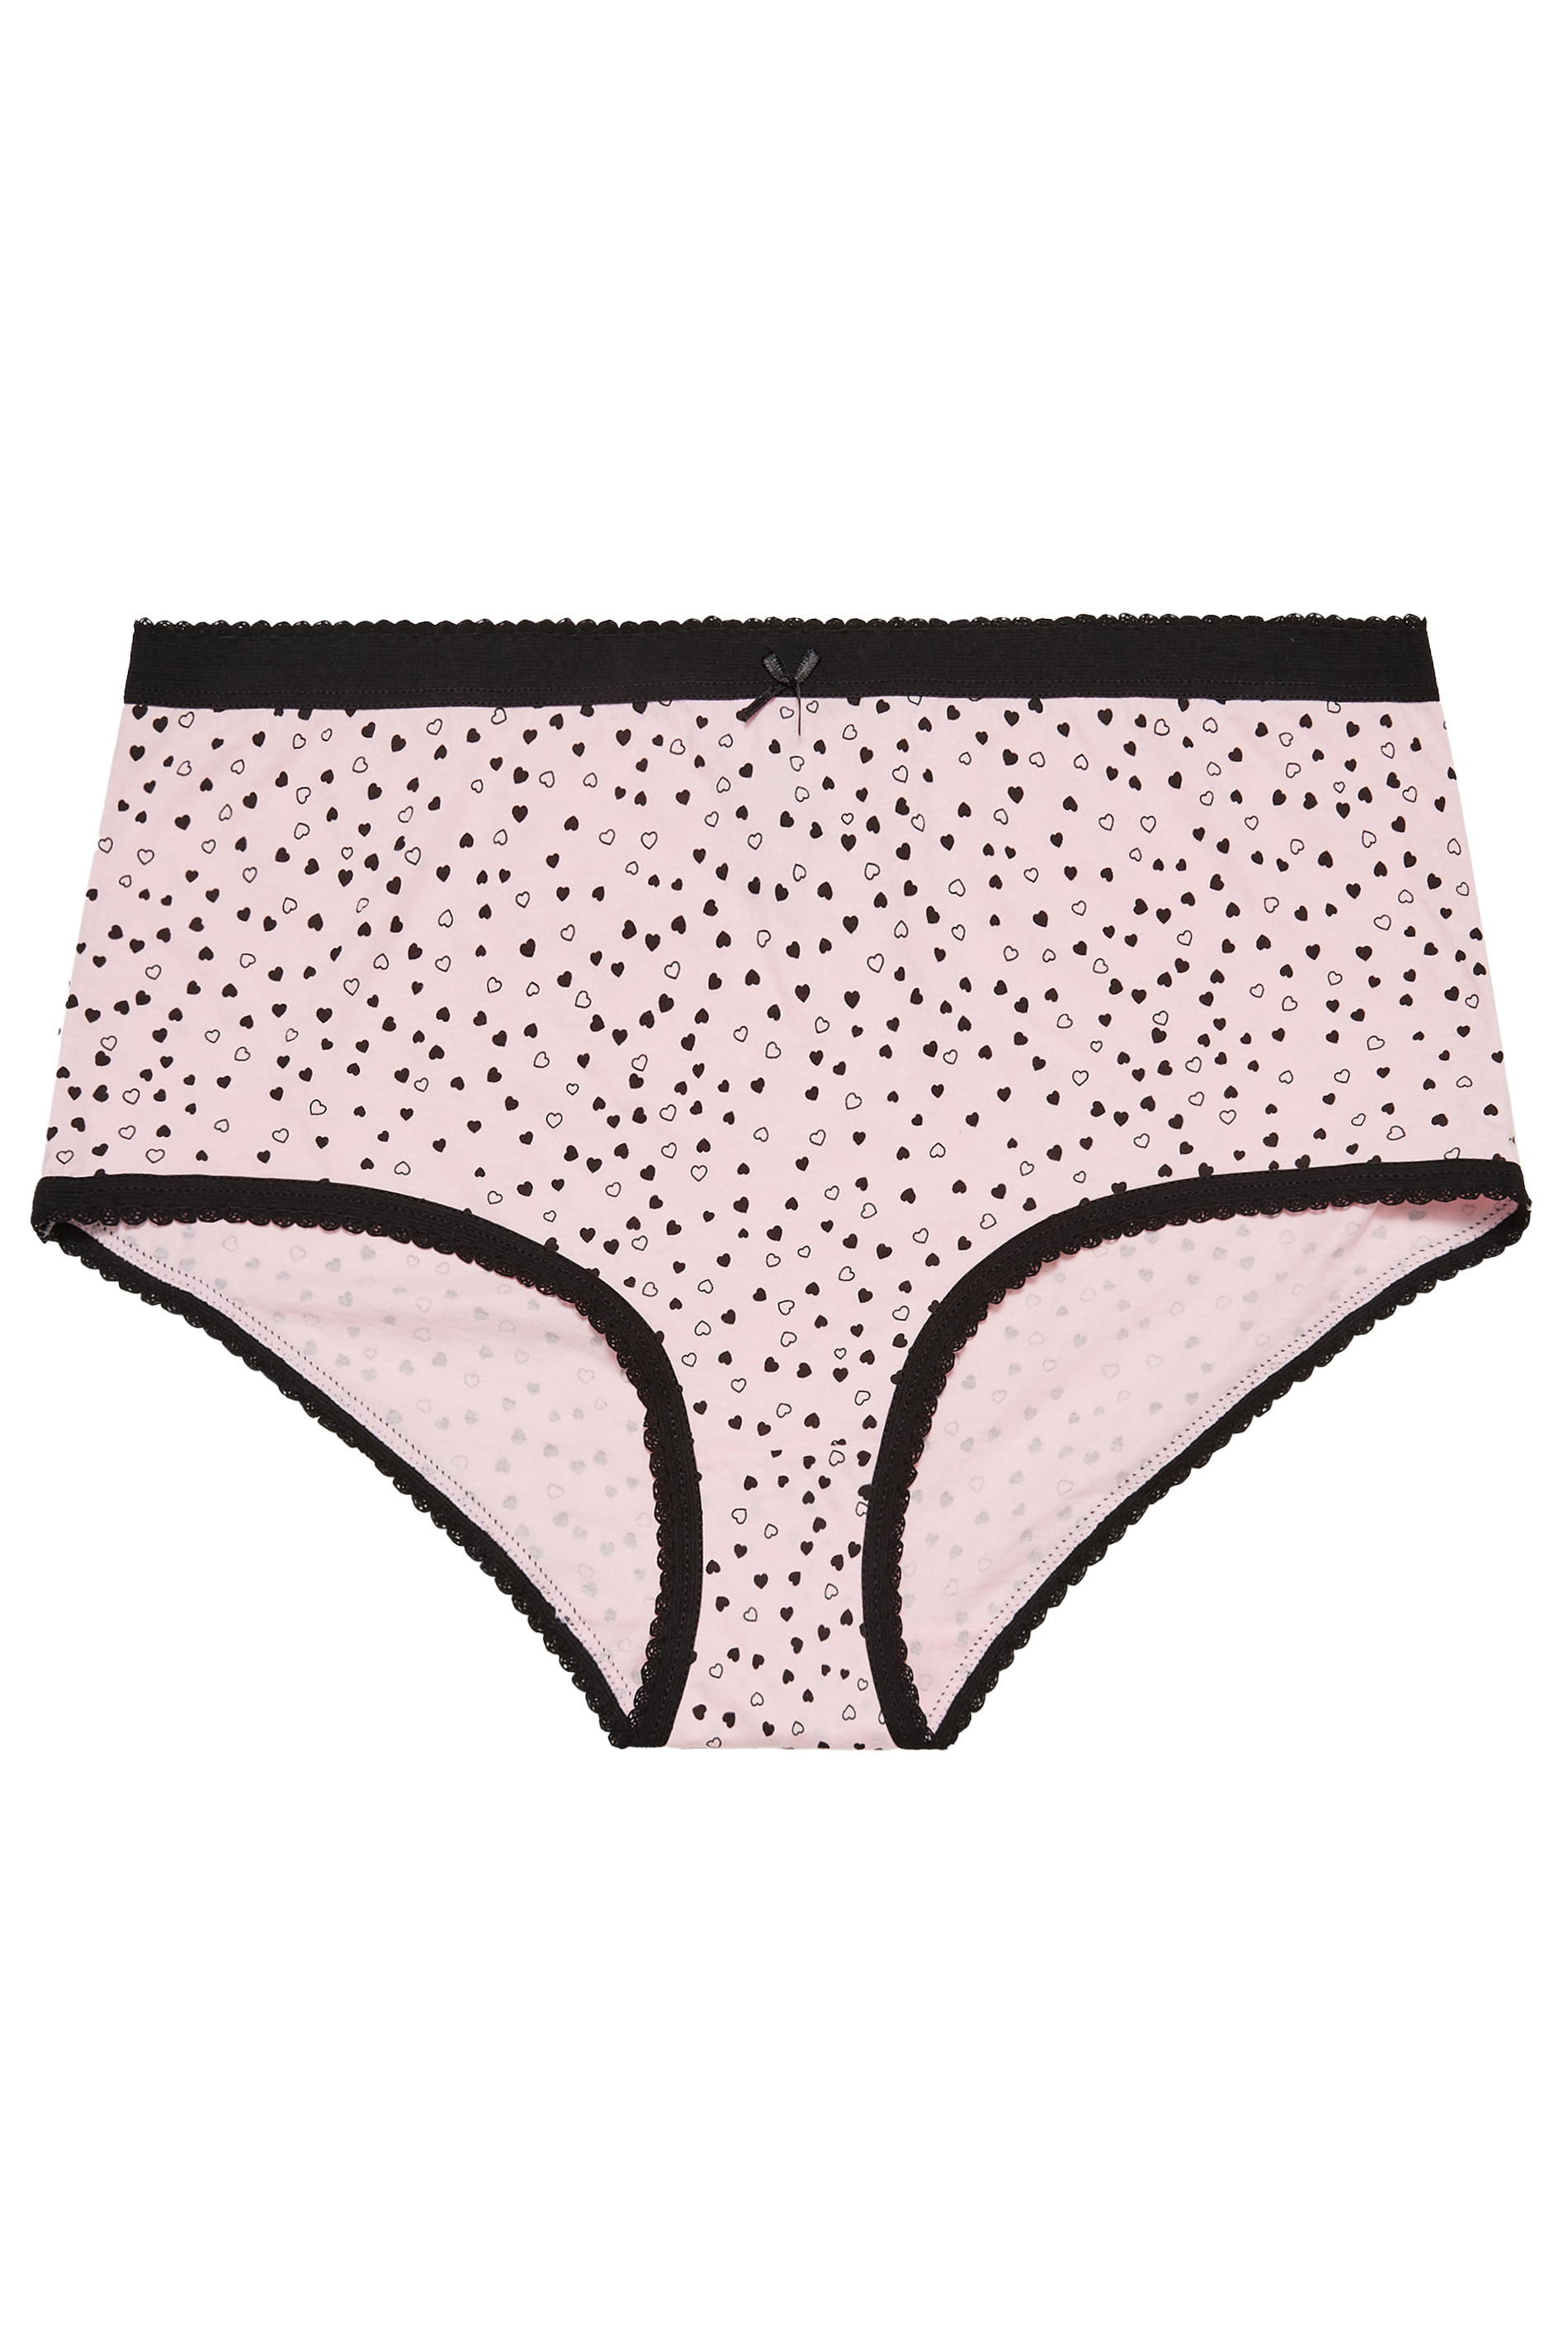 YOURS Plus Size 5 PACK Black & Pink Heart Swirl Print Full Briefs